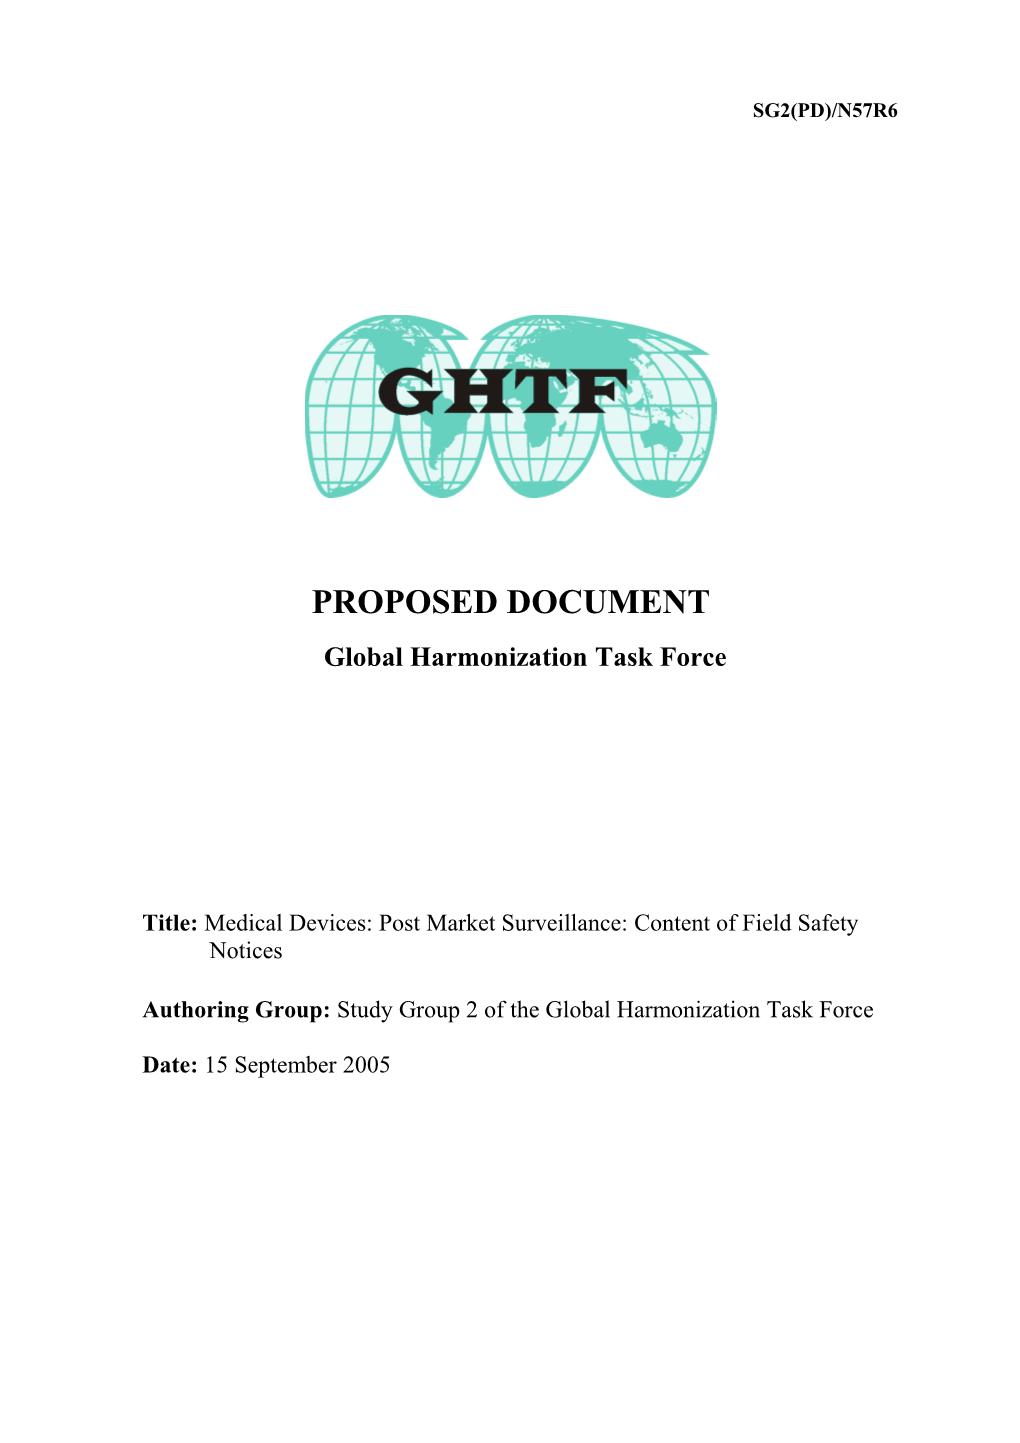 GHTF SG2 - Post Market Surveillance: Content of Field Safety Notices - September 2005